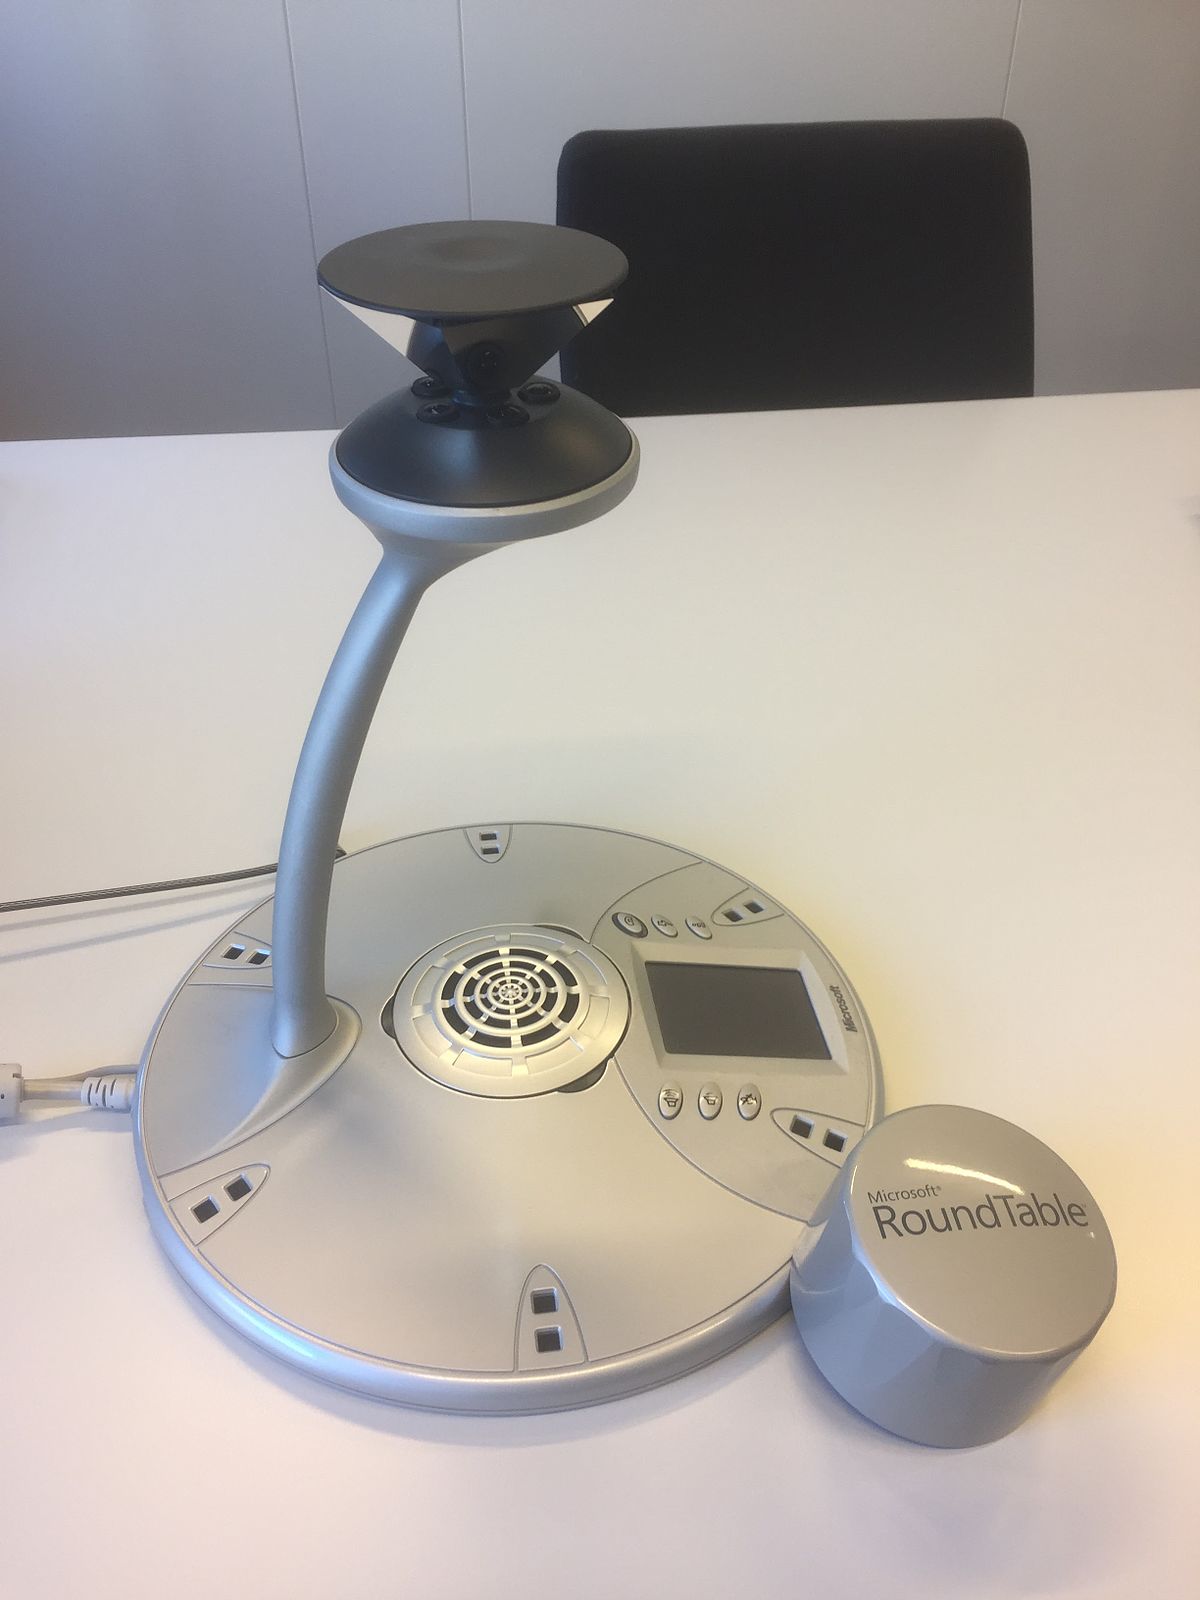 Microsoft Roundtable Wikipedia, Round Table Conference Device